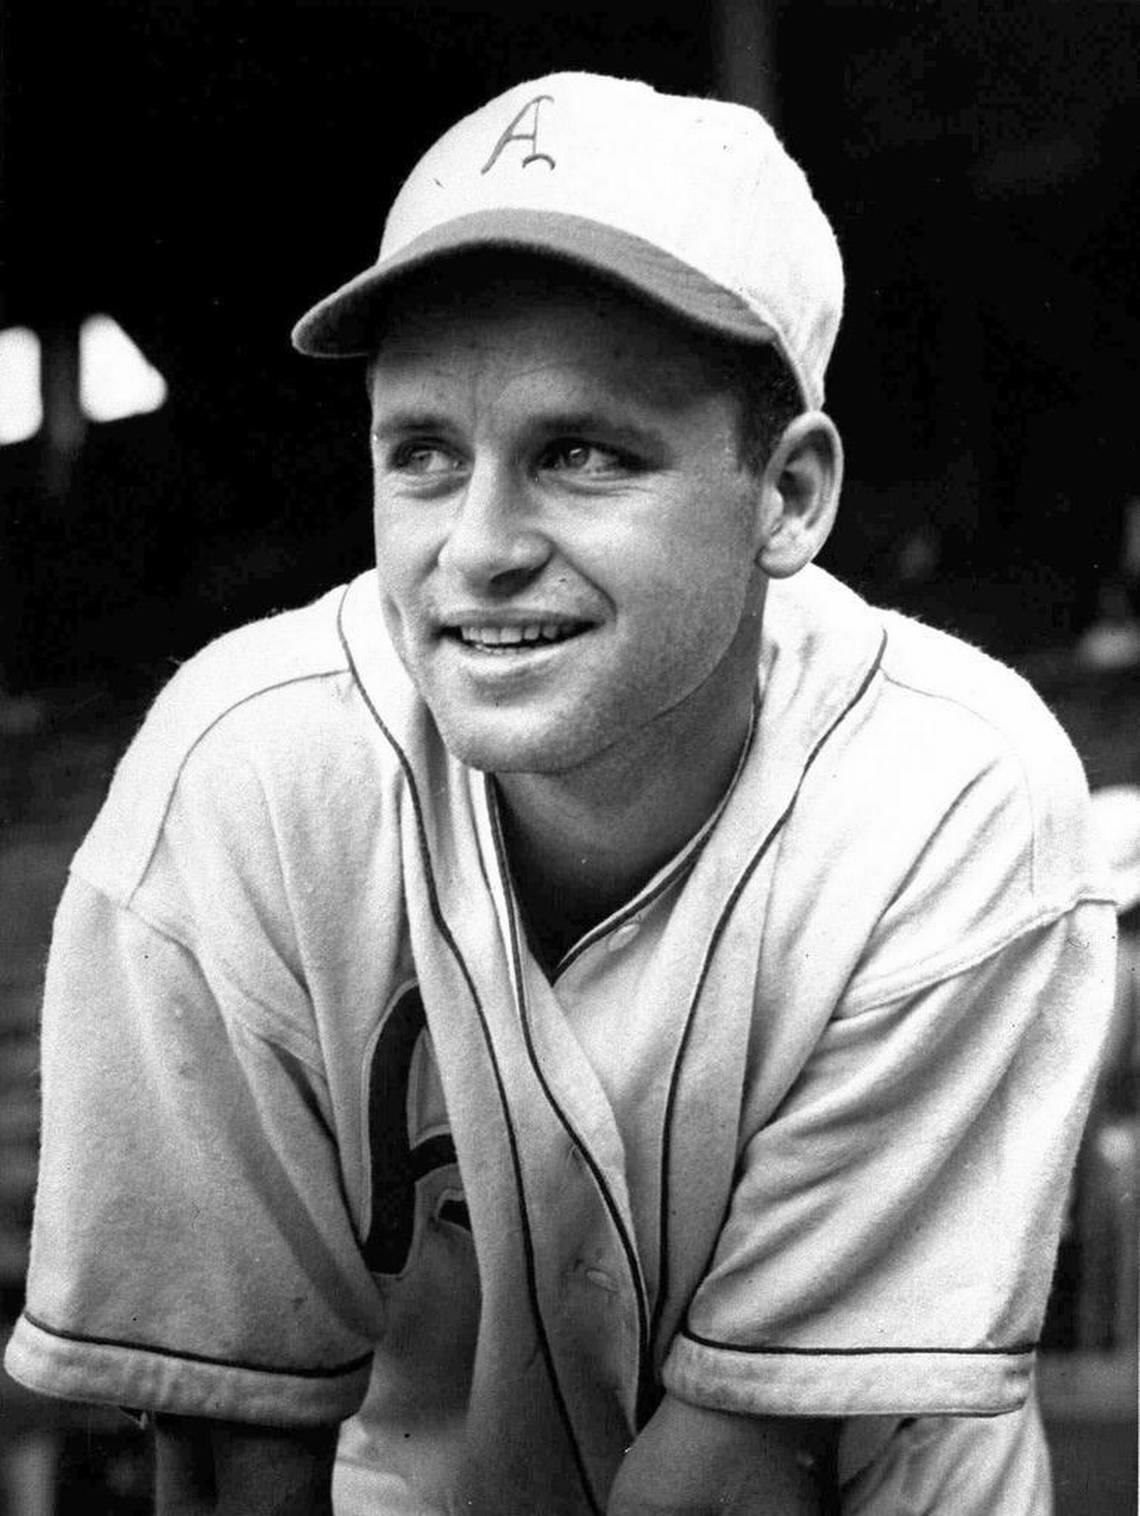 Baseball player Lawrence “Crash” Davis is shown in this Jan. 1941 photo in a Philadelphia Athletics uniform. Davis is the minor league baseball player made famous by the movie ``Bull Durham.”